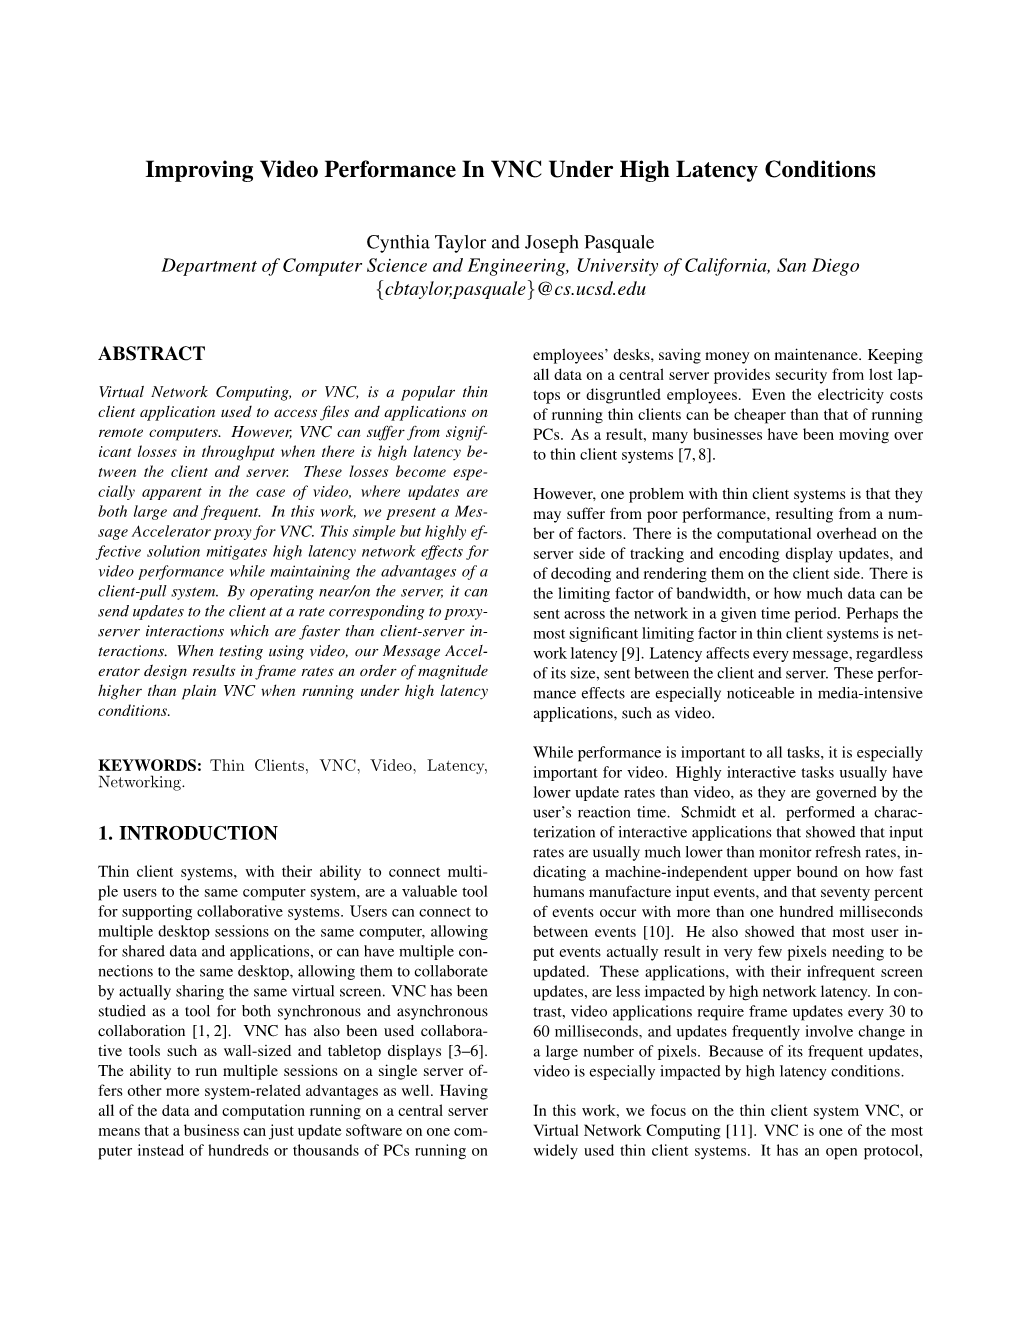 Improving Video Performance in VNC Under High Latency Conditions